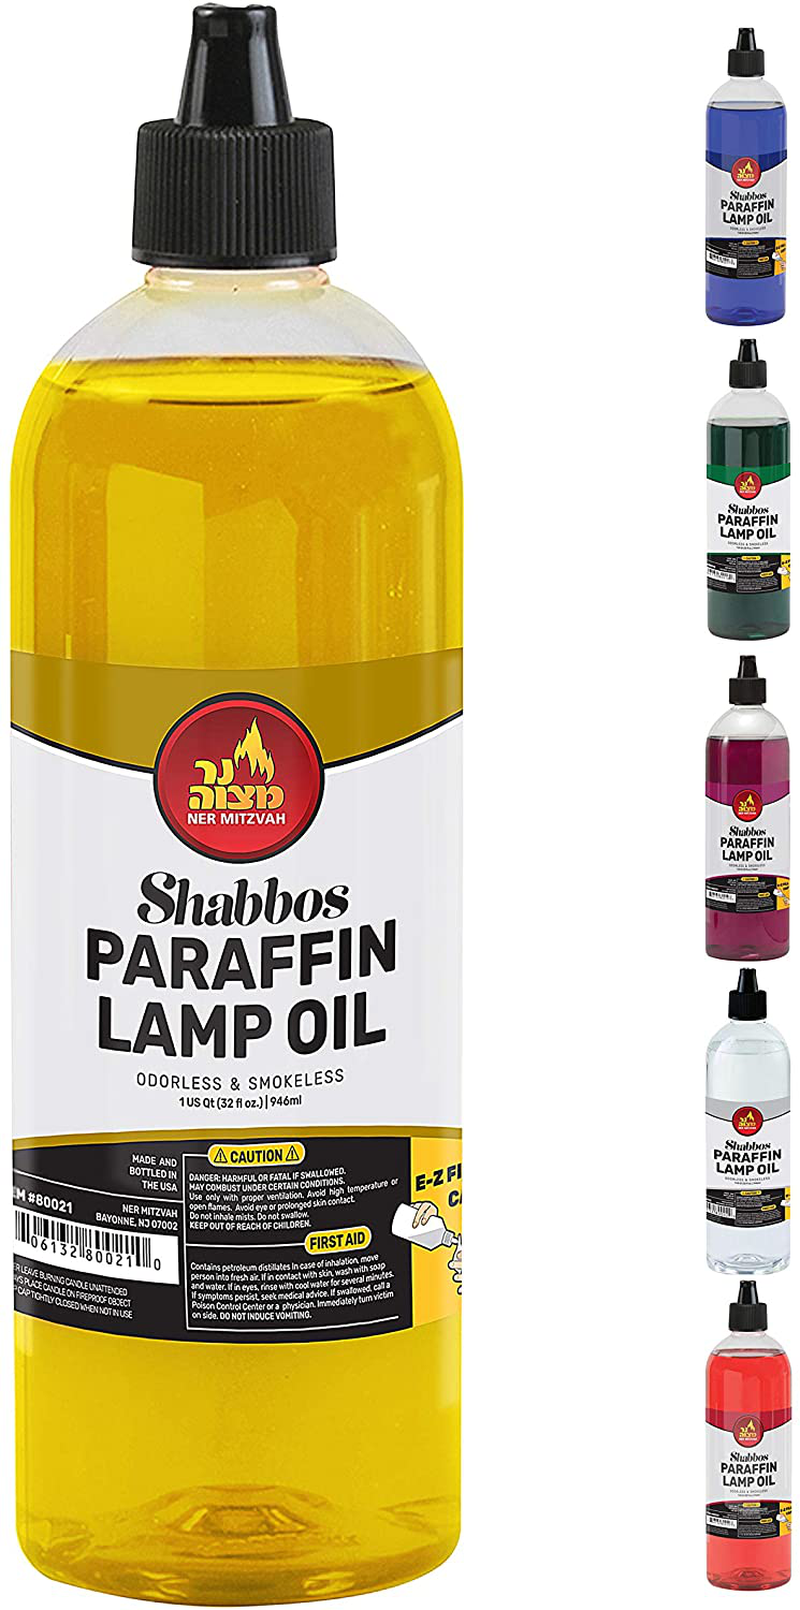 Ner Mitzvah Paraffin Lamp Oil - Yellow Smokeless, Odorless, Clean Burning Fuel for Indoor and Outdoor Use with E-Z Fill Cap and Pouring Spout - 32oz